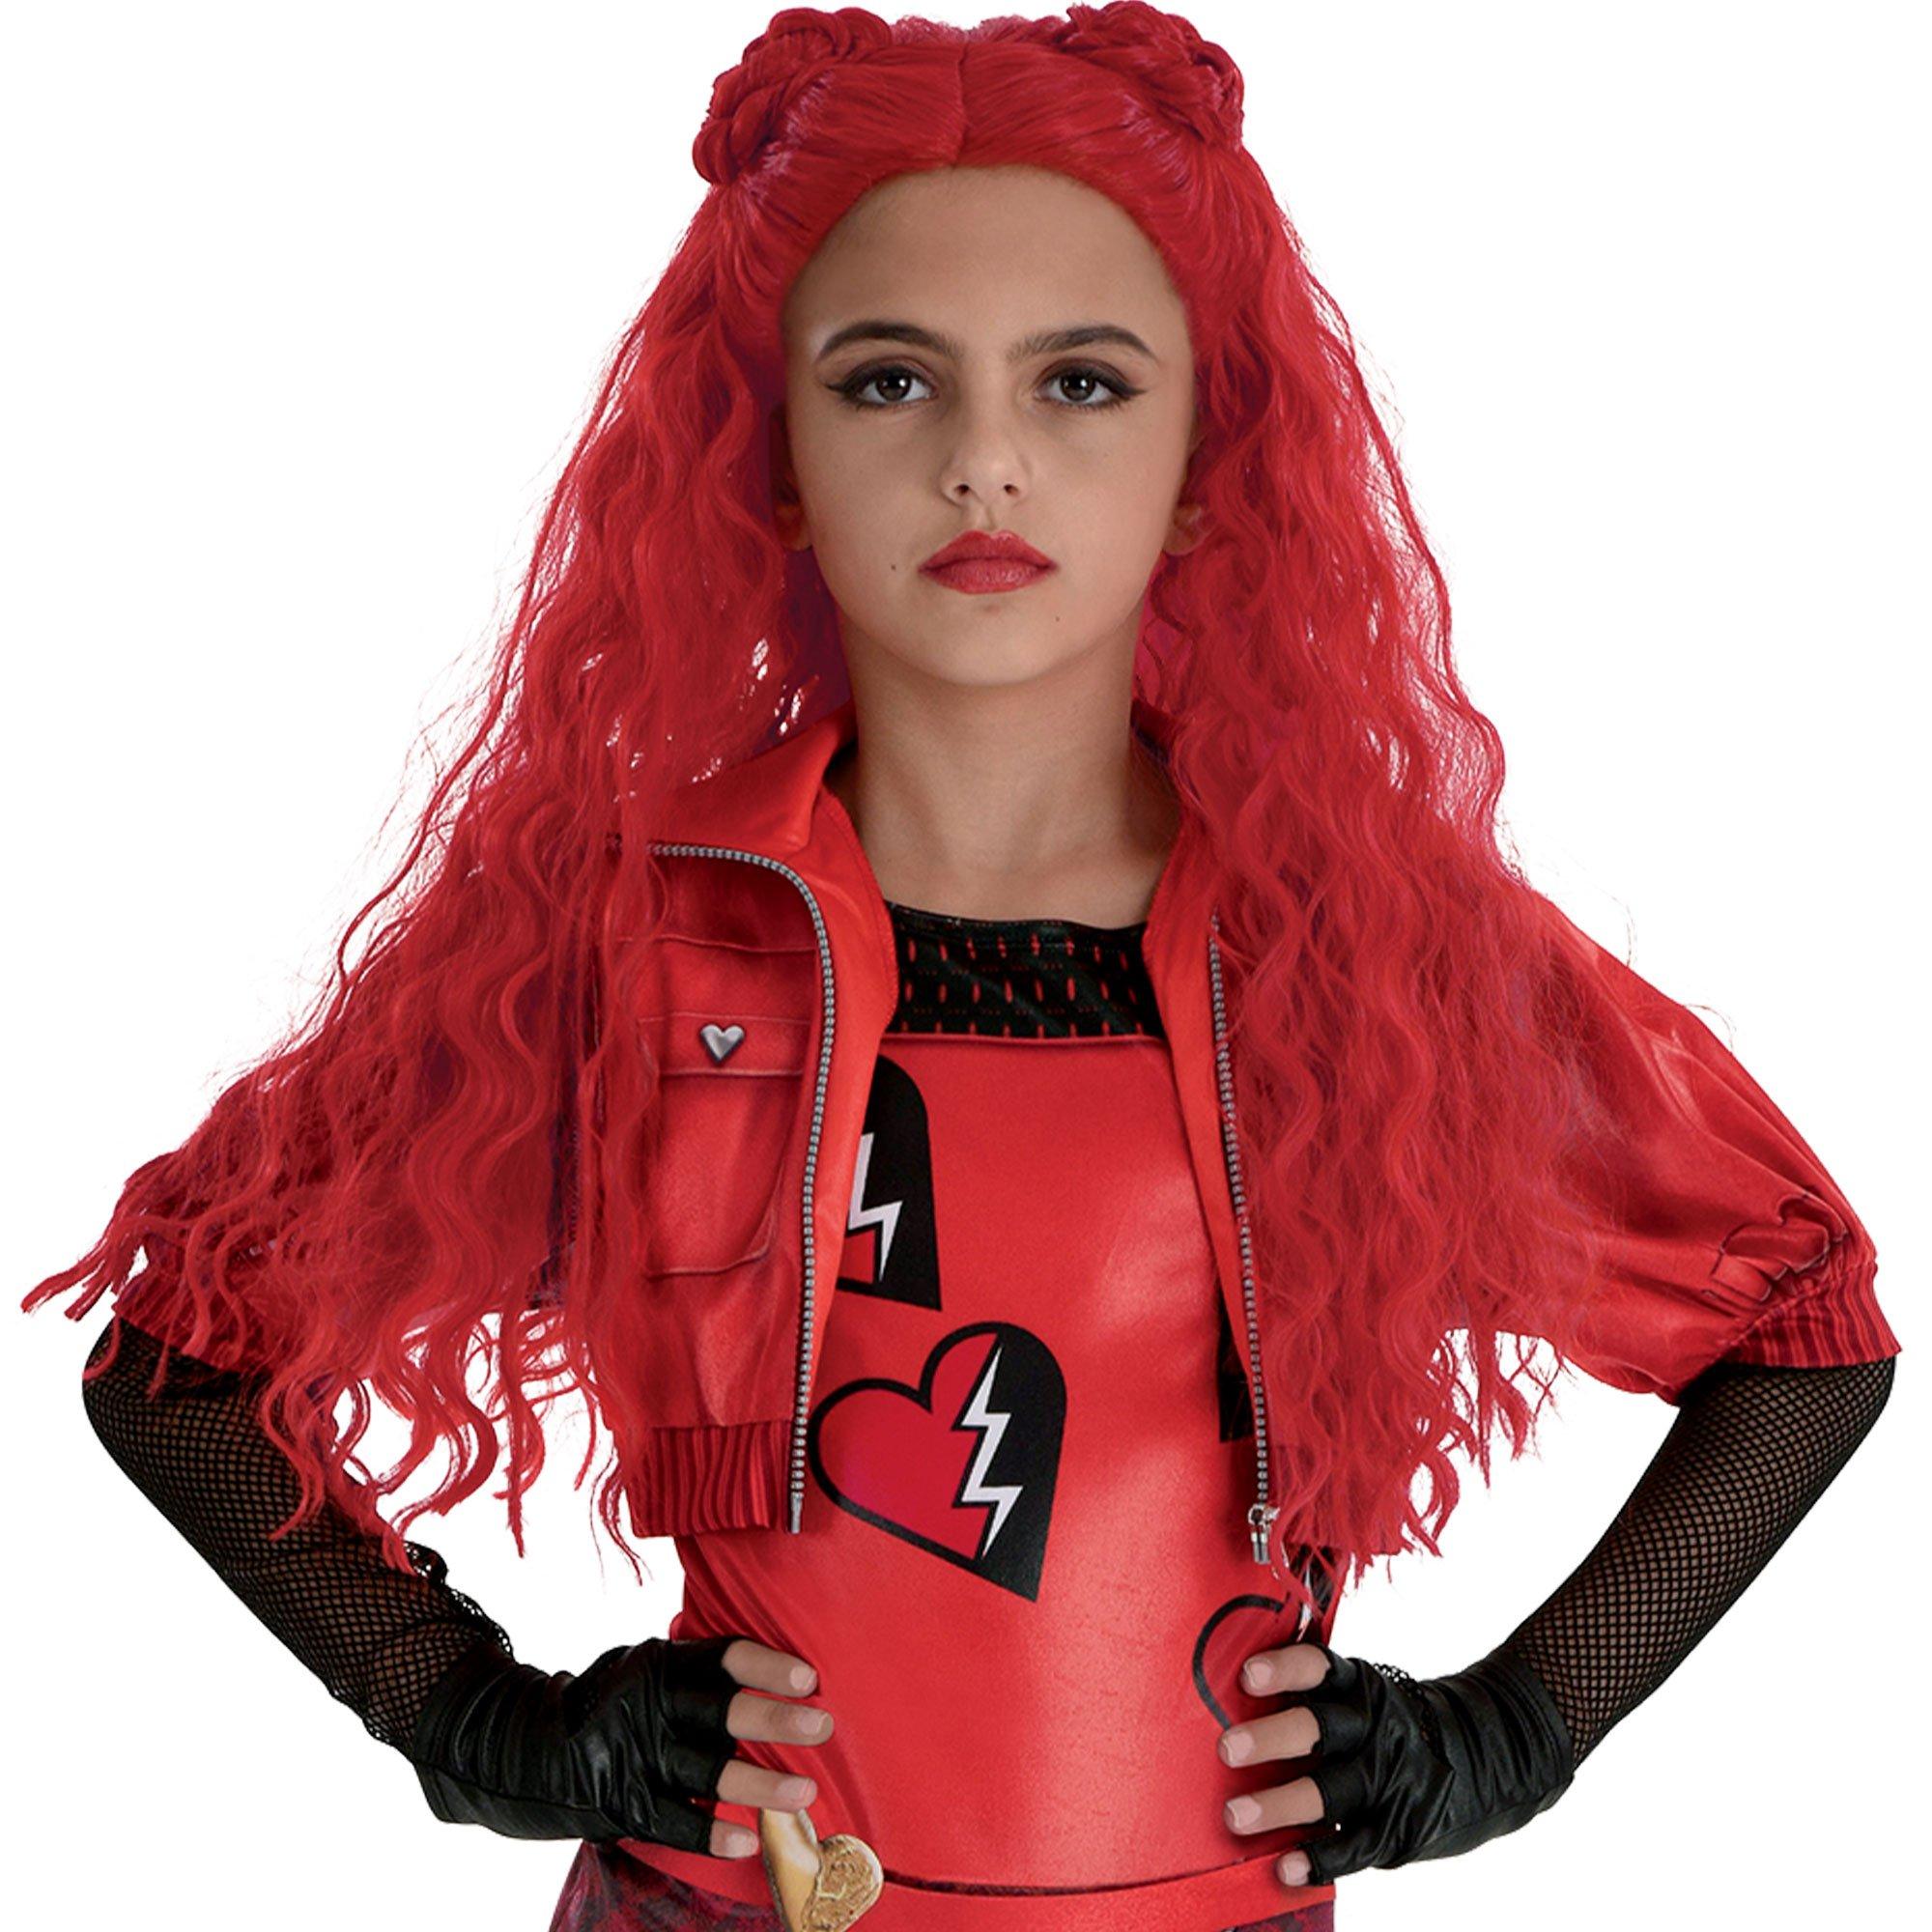 Kids' Red Wig - Descendants 4: The Rise of Red